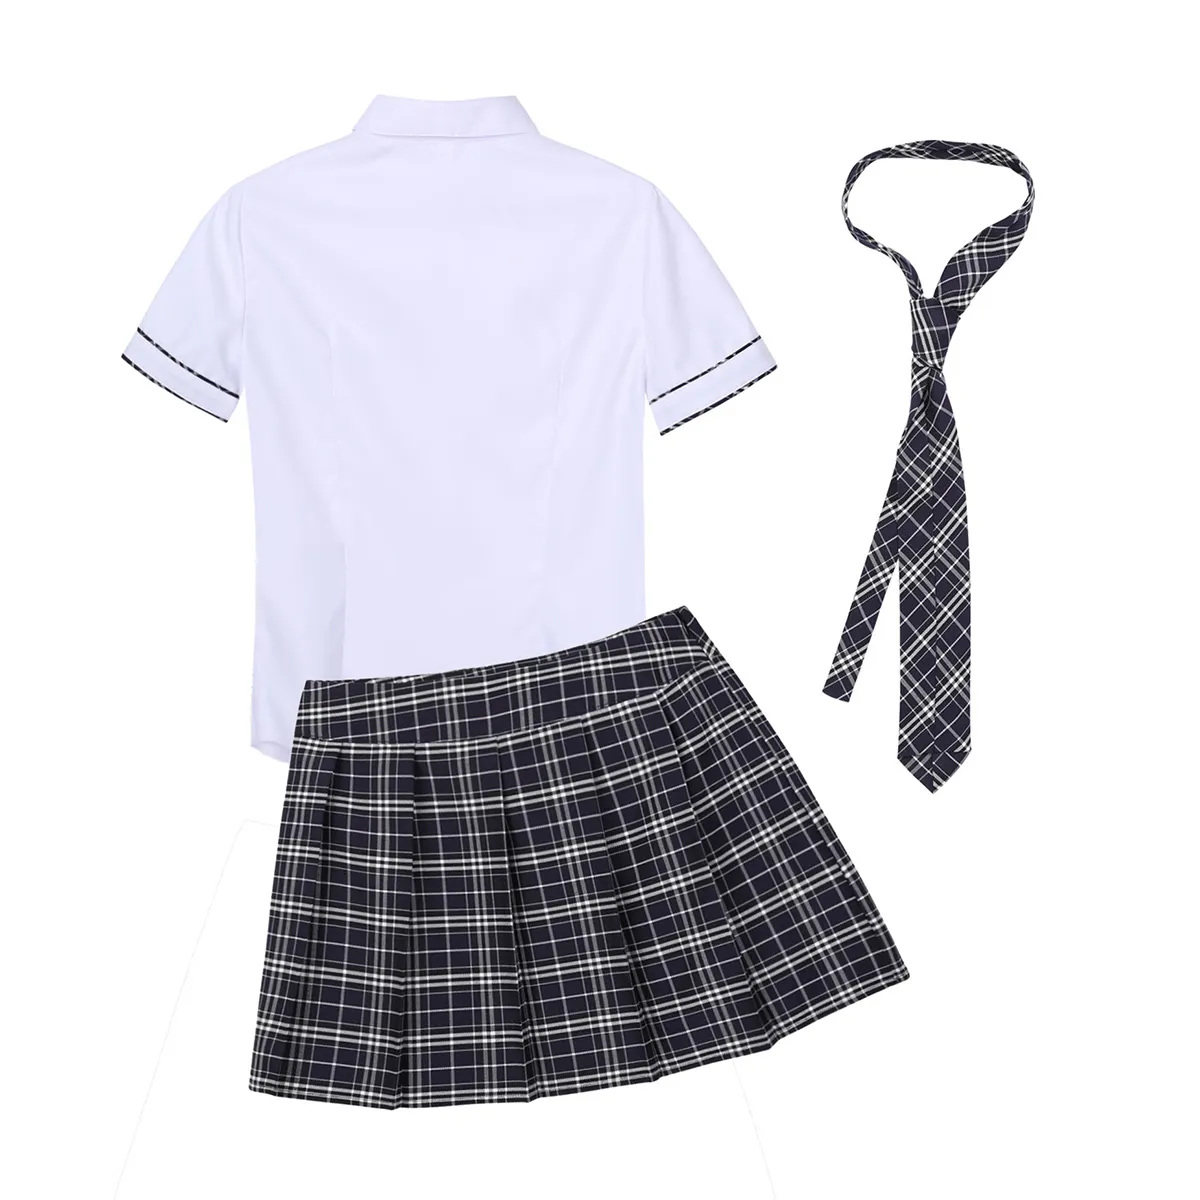 School Girl Cosplay Costume Set Back With Plaid Mini Skirt And Tie Adult  Lingerie For Halloween Parties 230411 From Yujia07, $8.57 | DHgate.Com